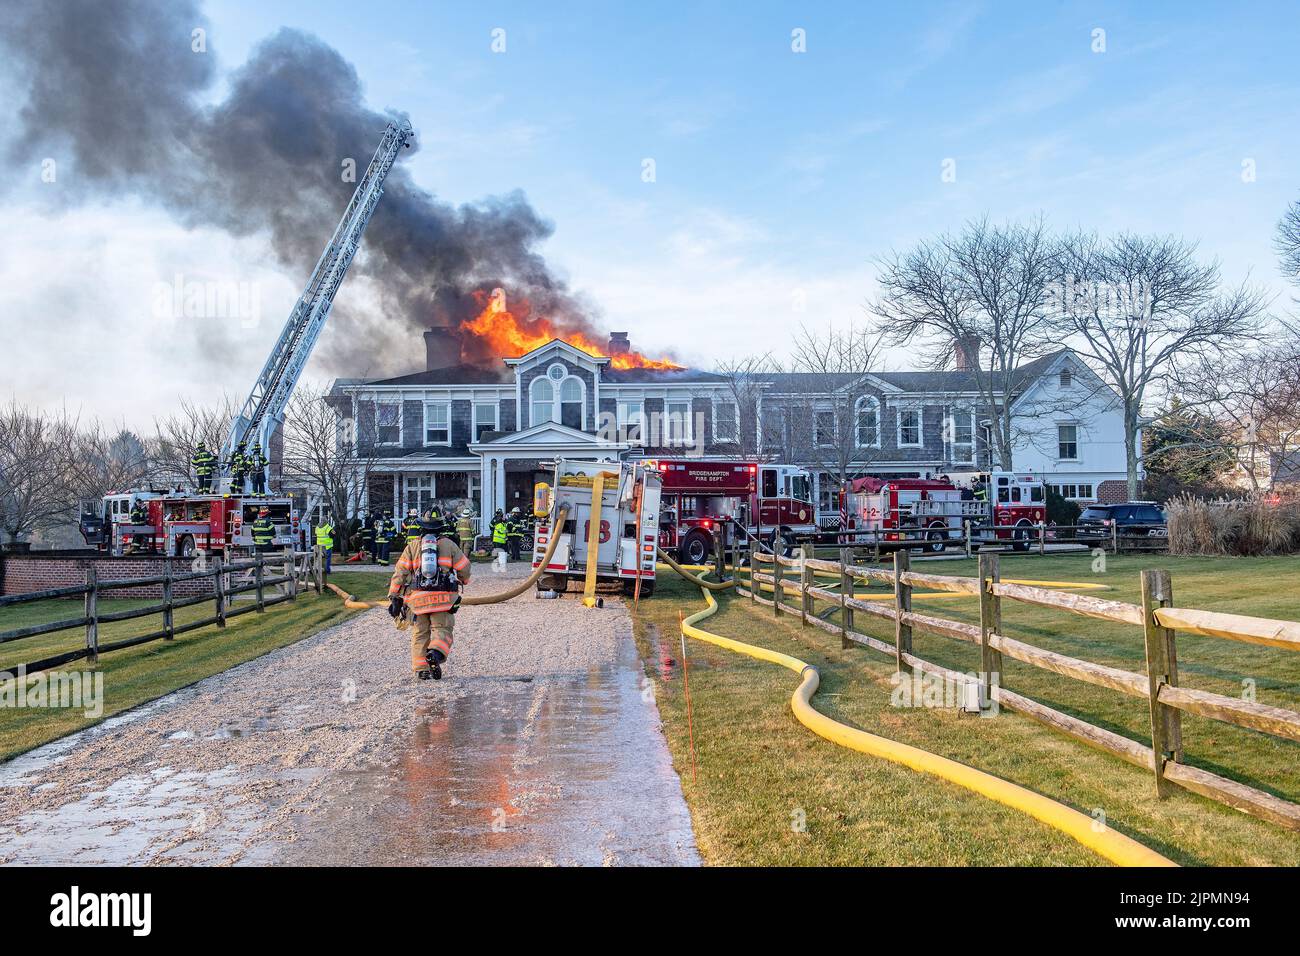 The Bridgehampton Fire Department, assisted by mutual aid from several other local fire departments, battled a working structure fire in the roof of a Stock Photo